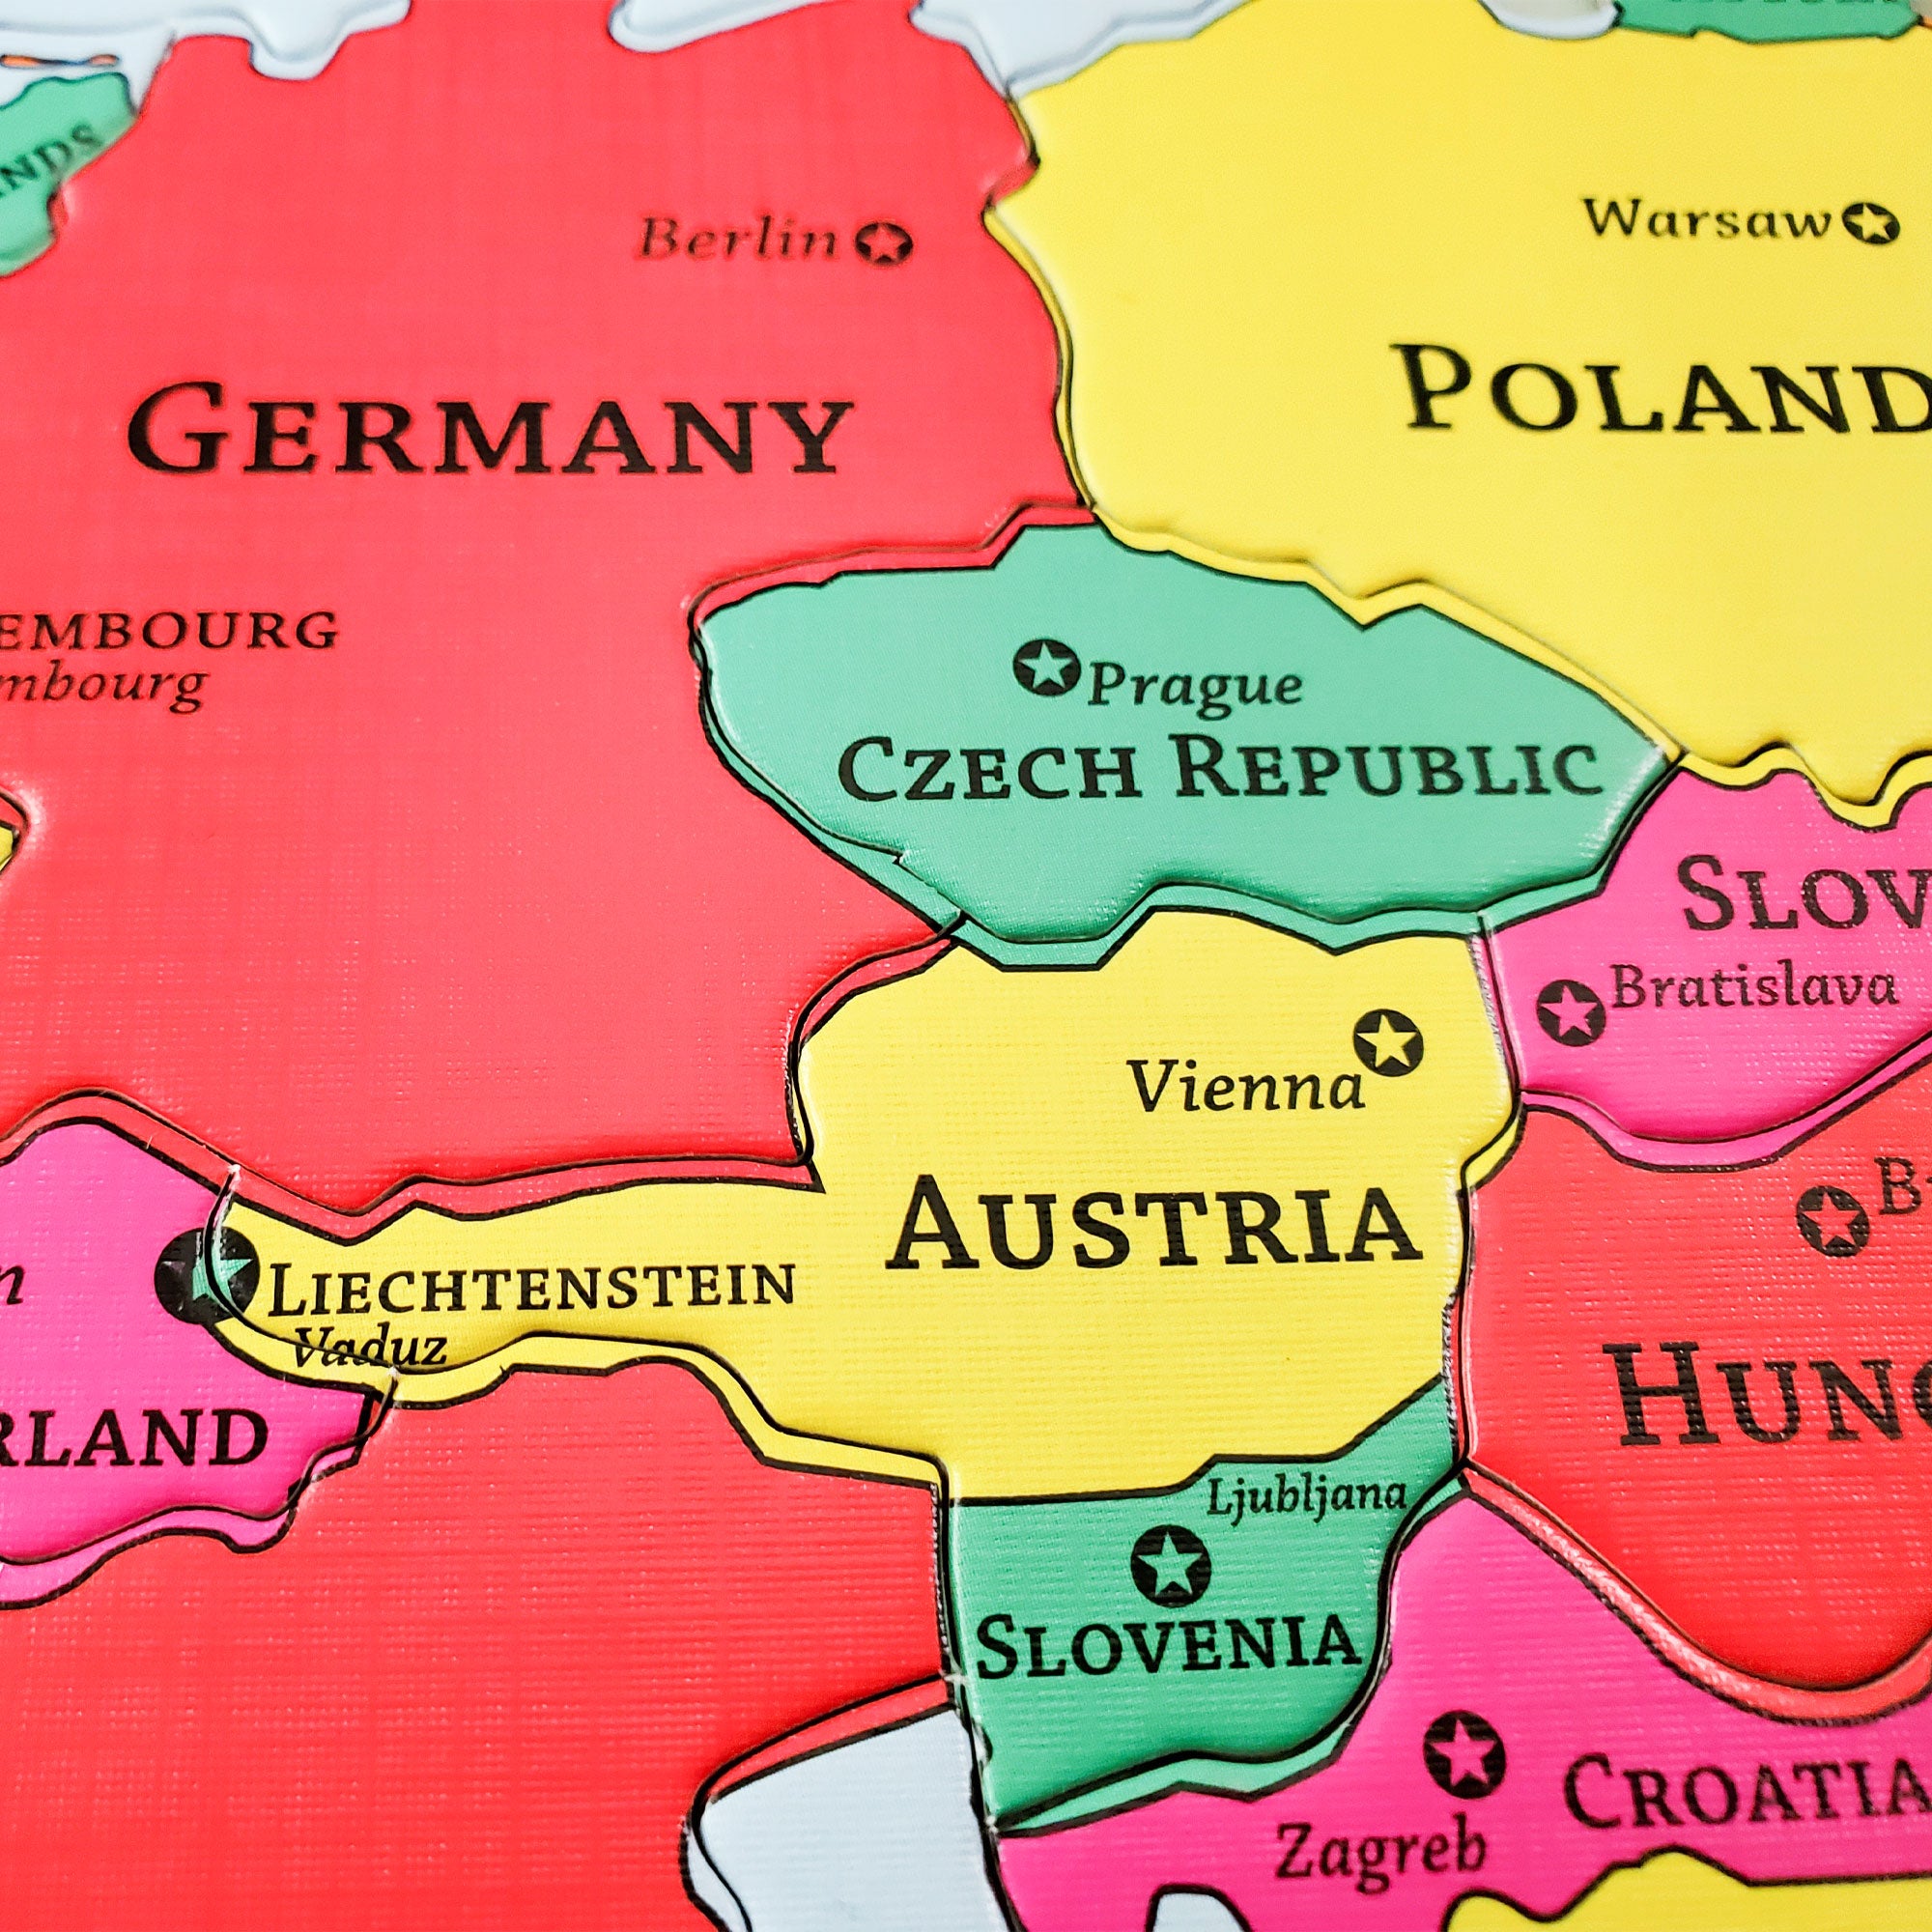 Close up of the Europe Geo Puzzle. The put-together pieces show Germany, Czech Republic, Austria, Slovenia, Poland, Croatia, and the edges of several nearby countries. It also shows the name of each countries' capitol, along with the name of each country. Each country is a different color. The colors are red, yellow, green, and pink.